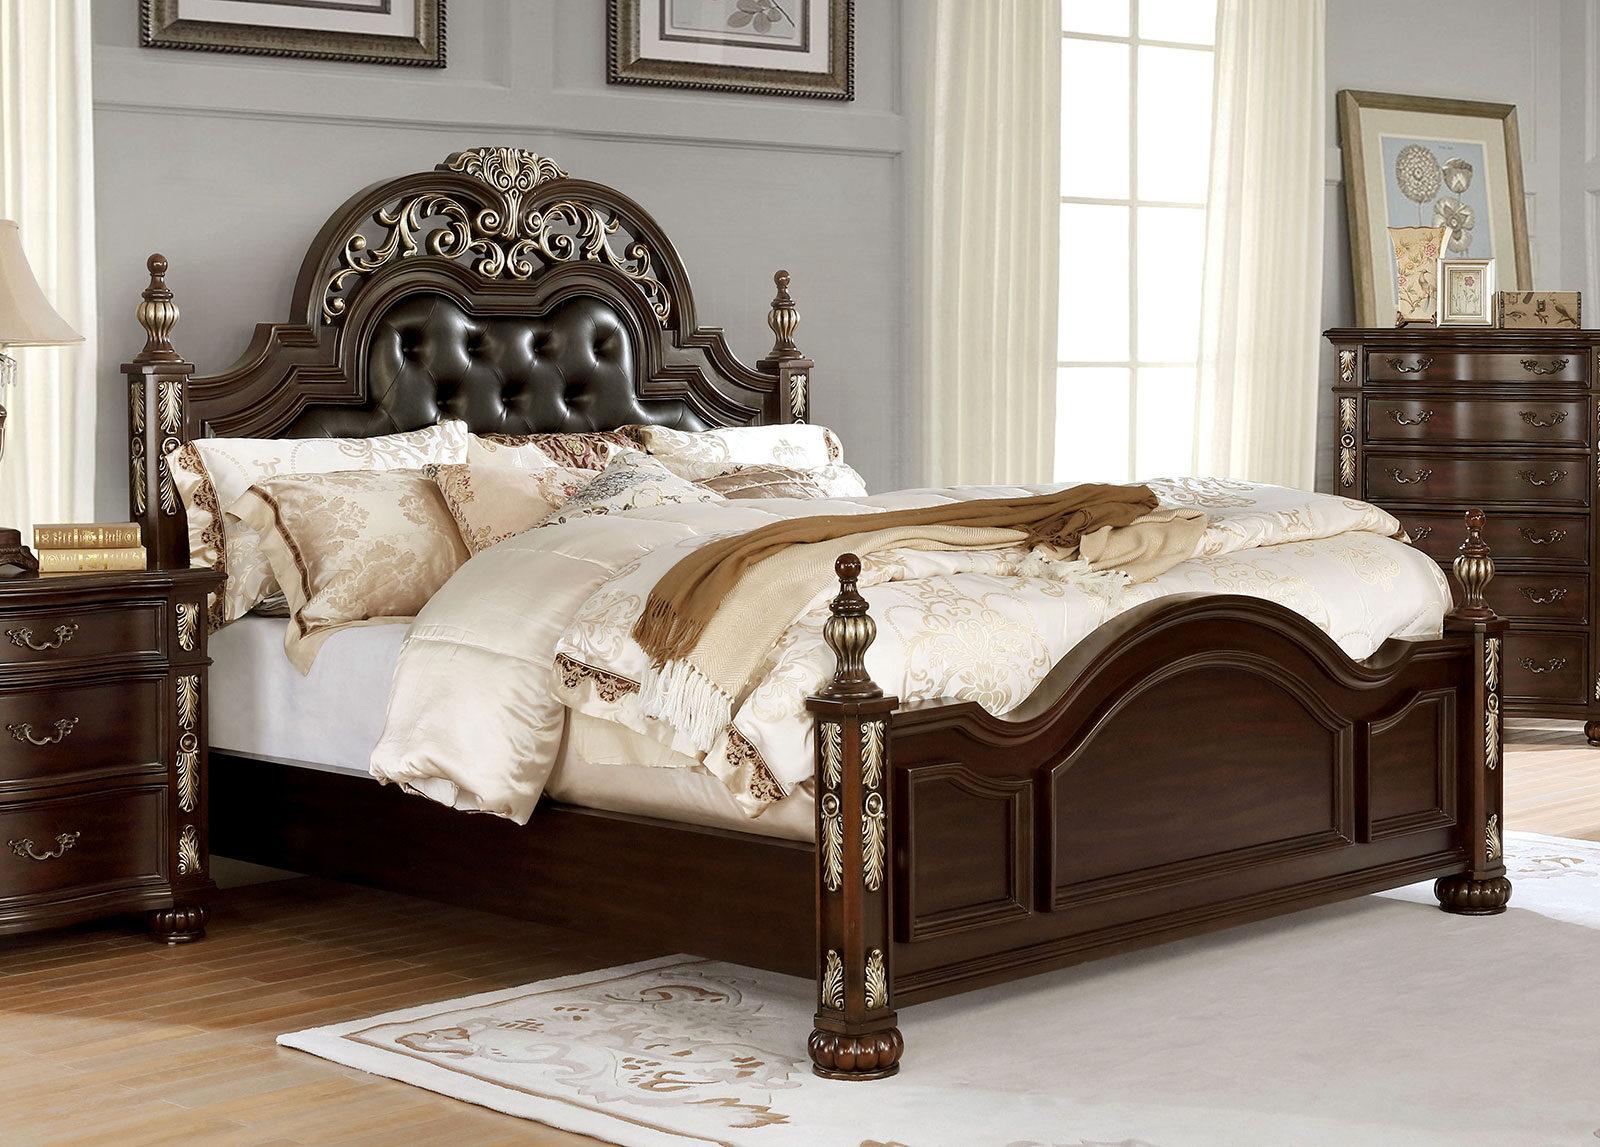 Furniture of America CM7926-CK Theodor Poster Bed